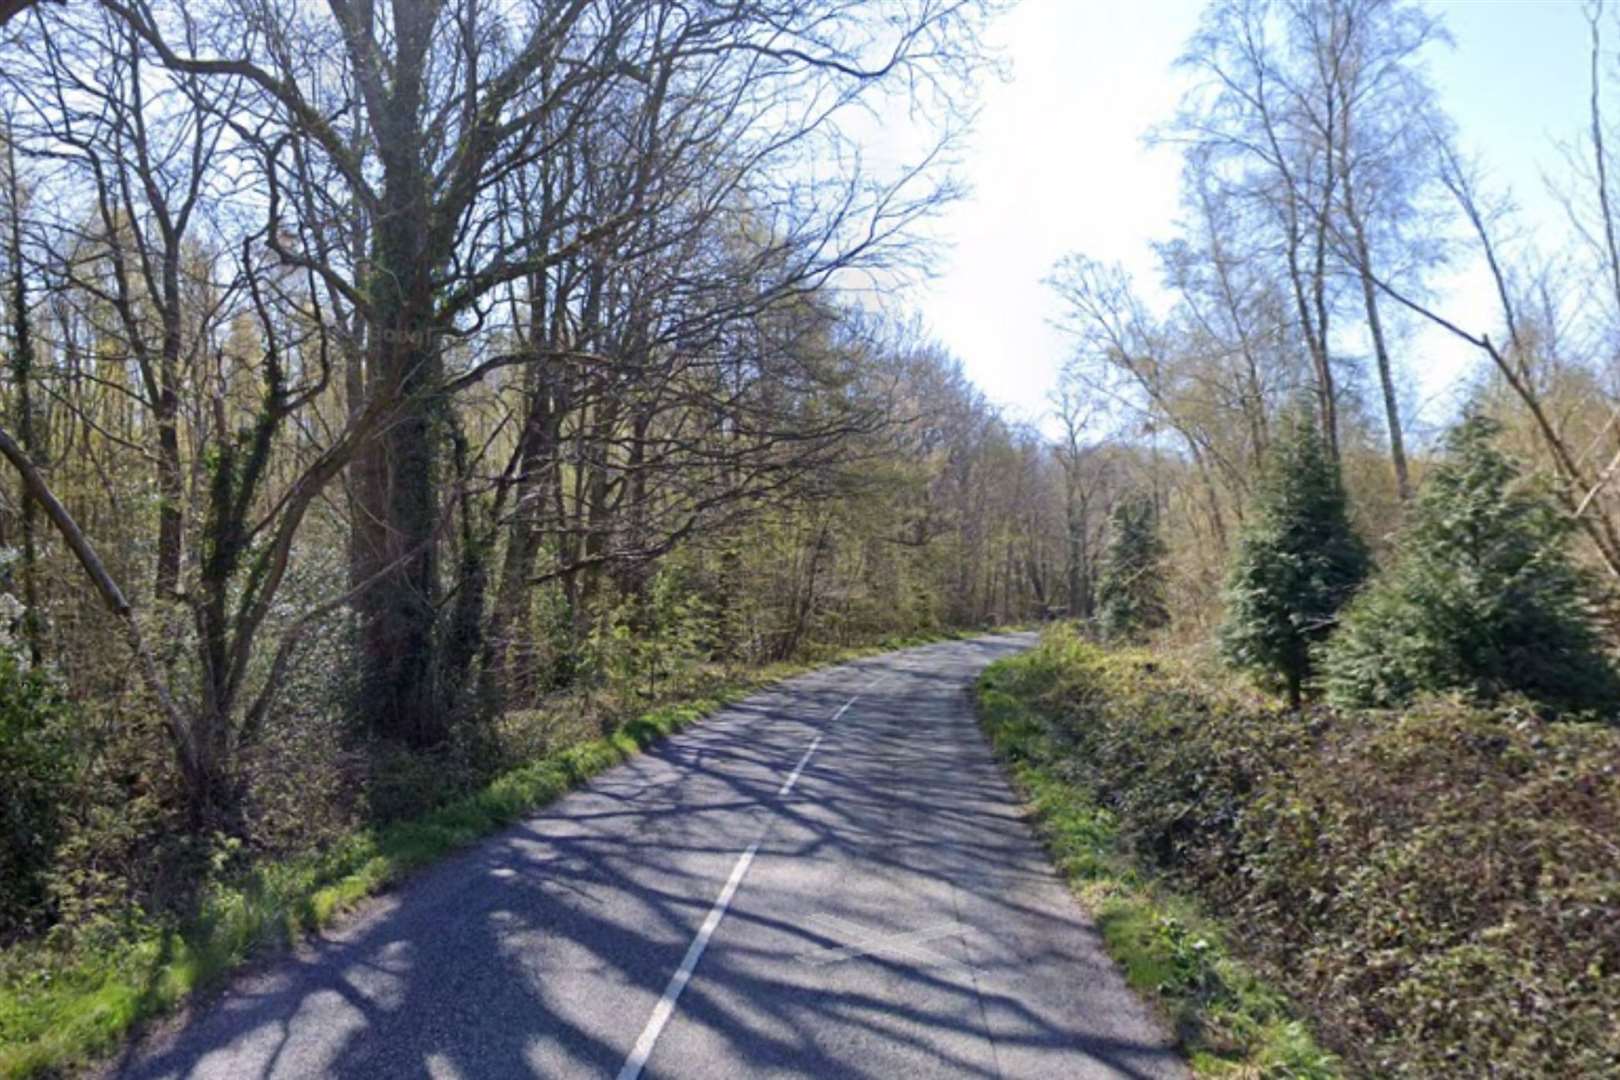 The crash happened on Golford Road, near Benenden. Photo: Google Street View